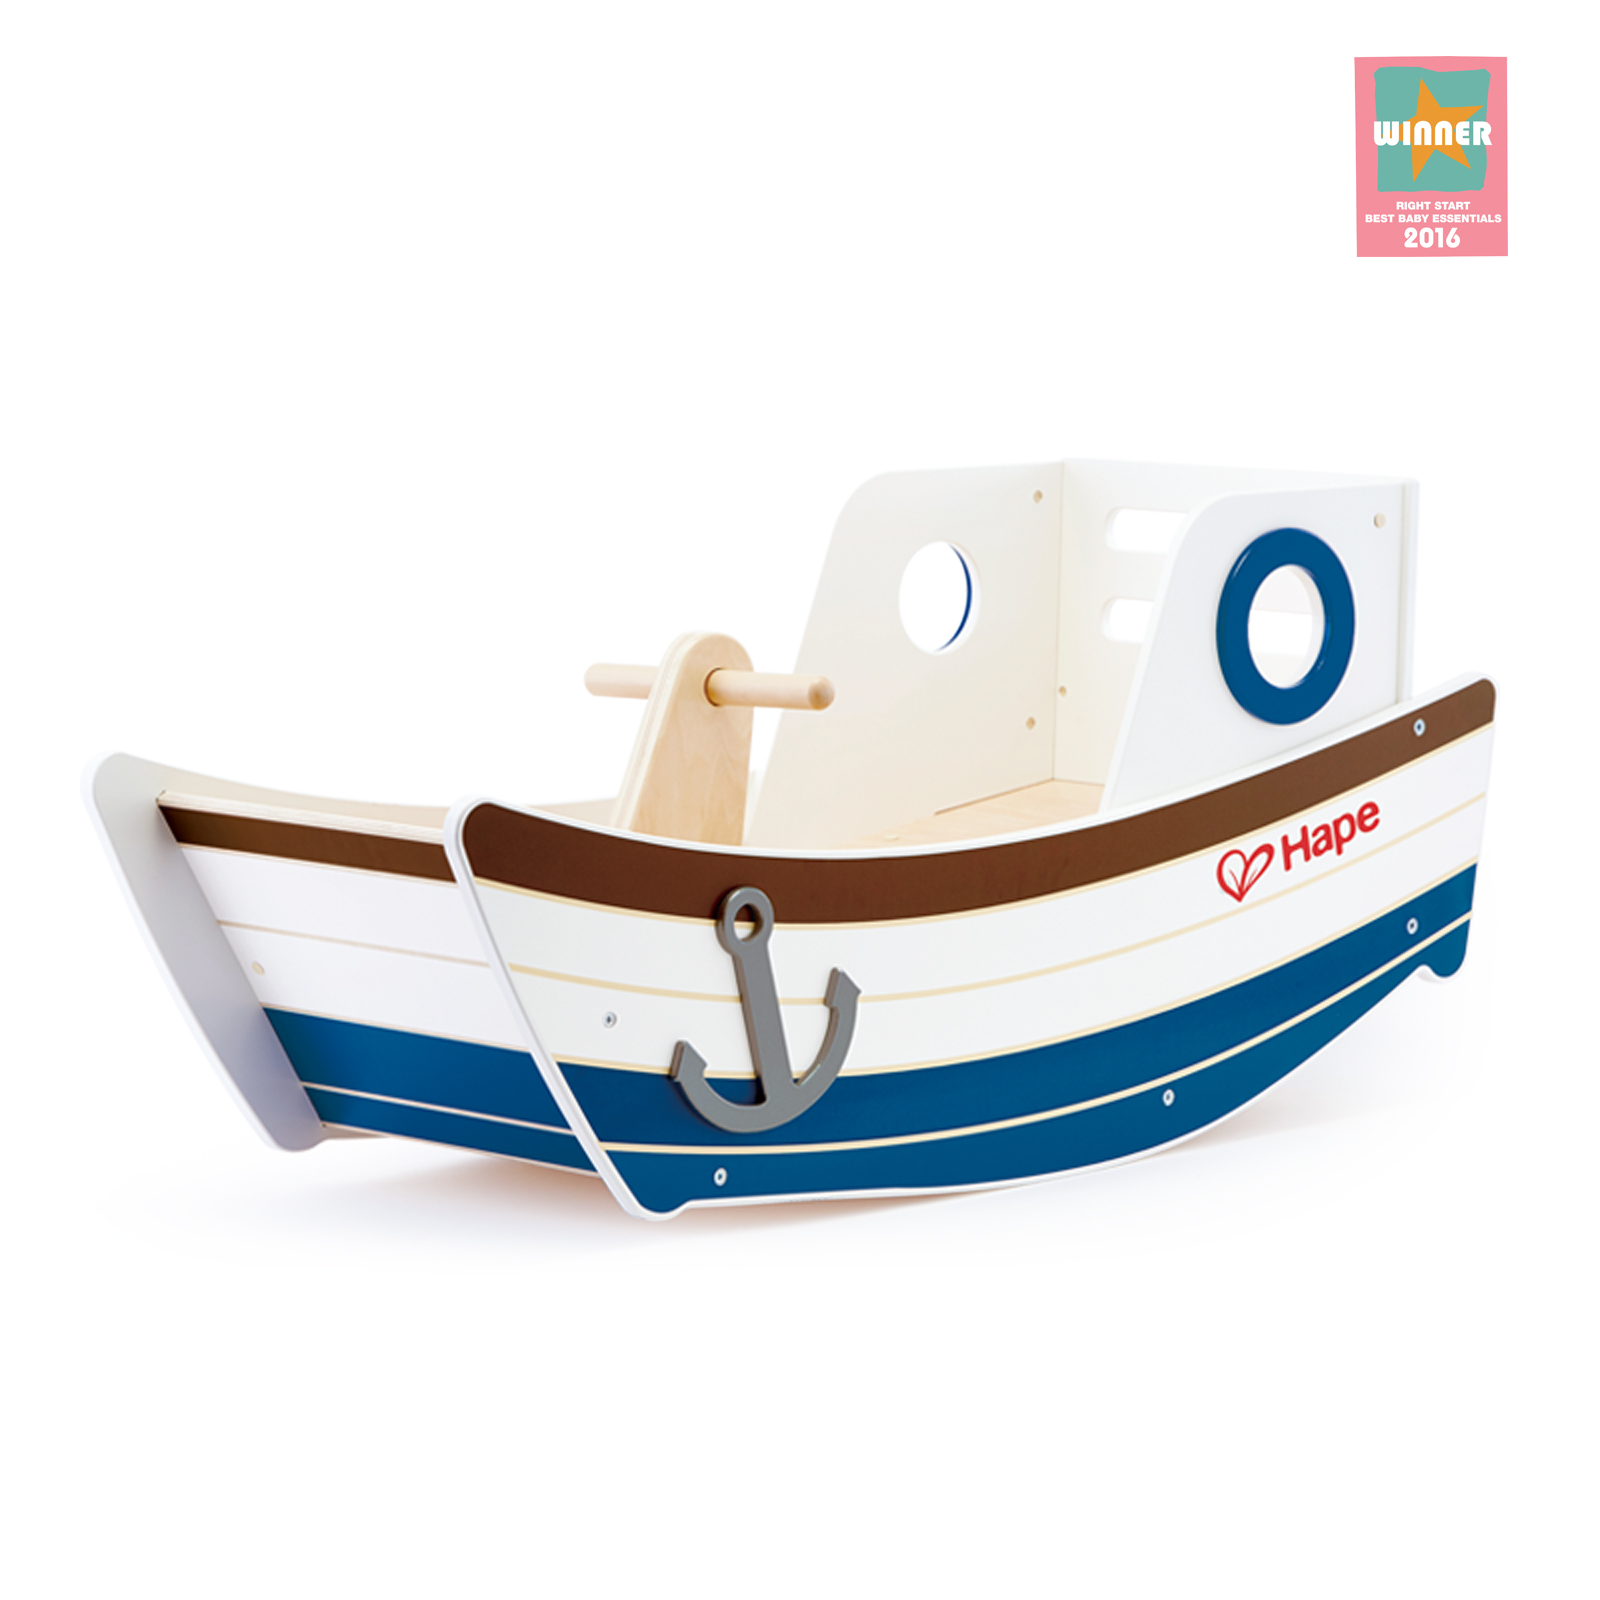 Hape E0102 High Seas Rocking Boat Wooden Rocker Toy Baby Toddler Age 12 Months for sale online 